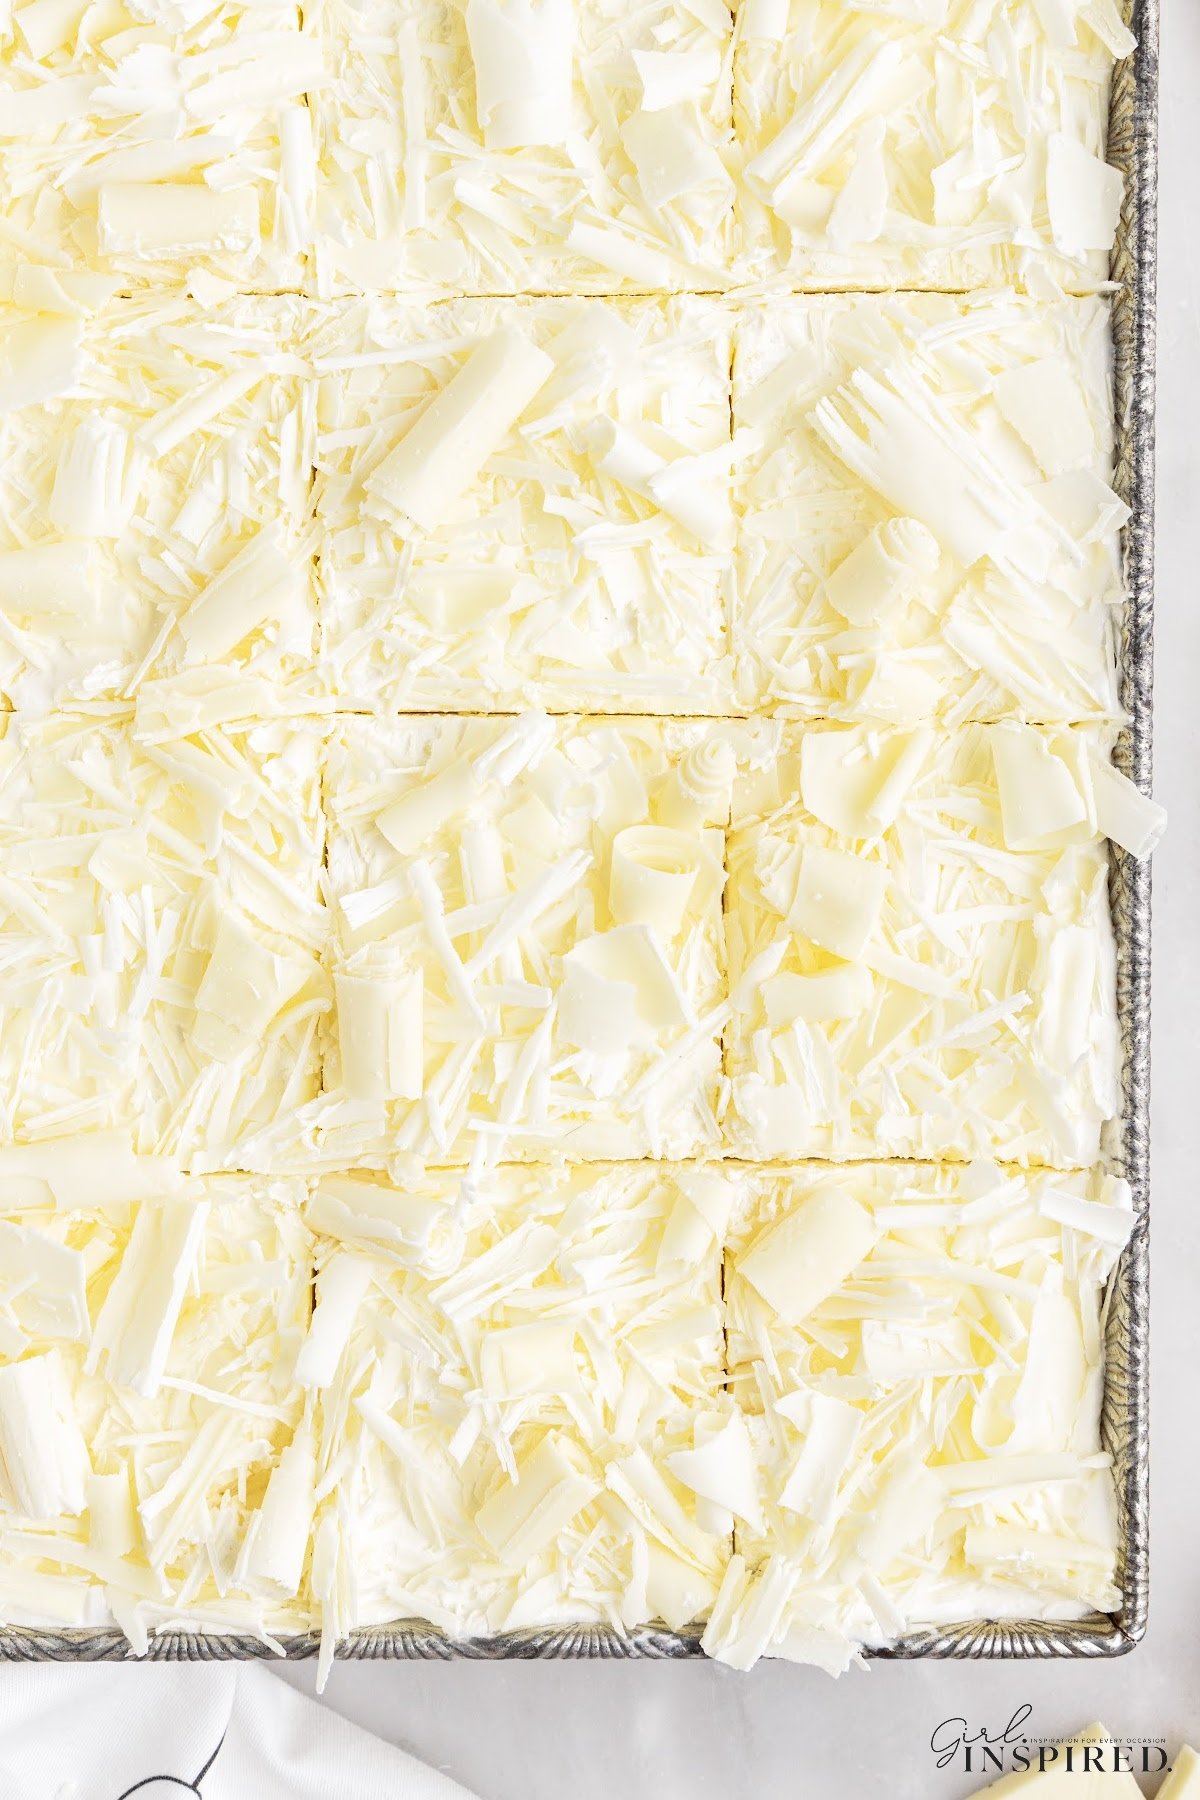 Baking dish of White Chocolate Lasagna cut in squares and ready to serve.